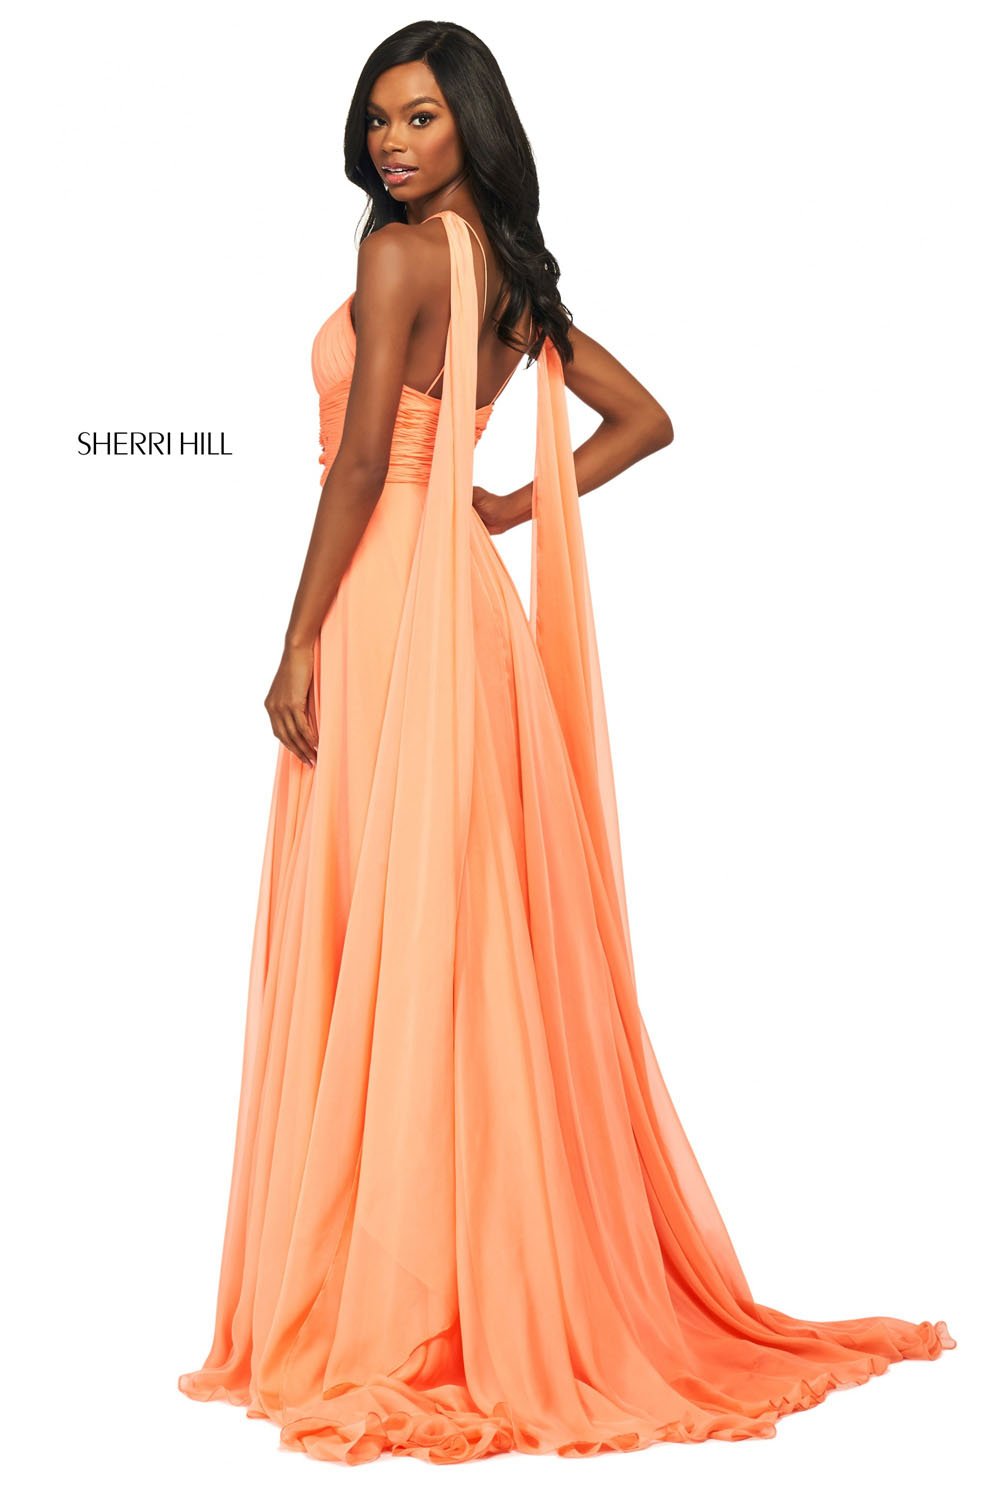 Sherri Hill 53761 dress images in these colors: Aqua, Yellow, Emerald, Light Blue, Dreamcicle, Bright Pink, Blush, Red.